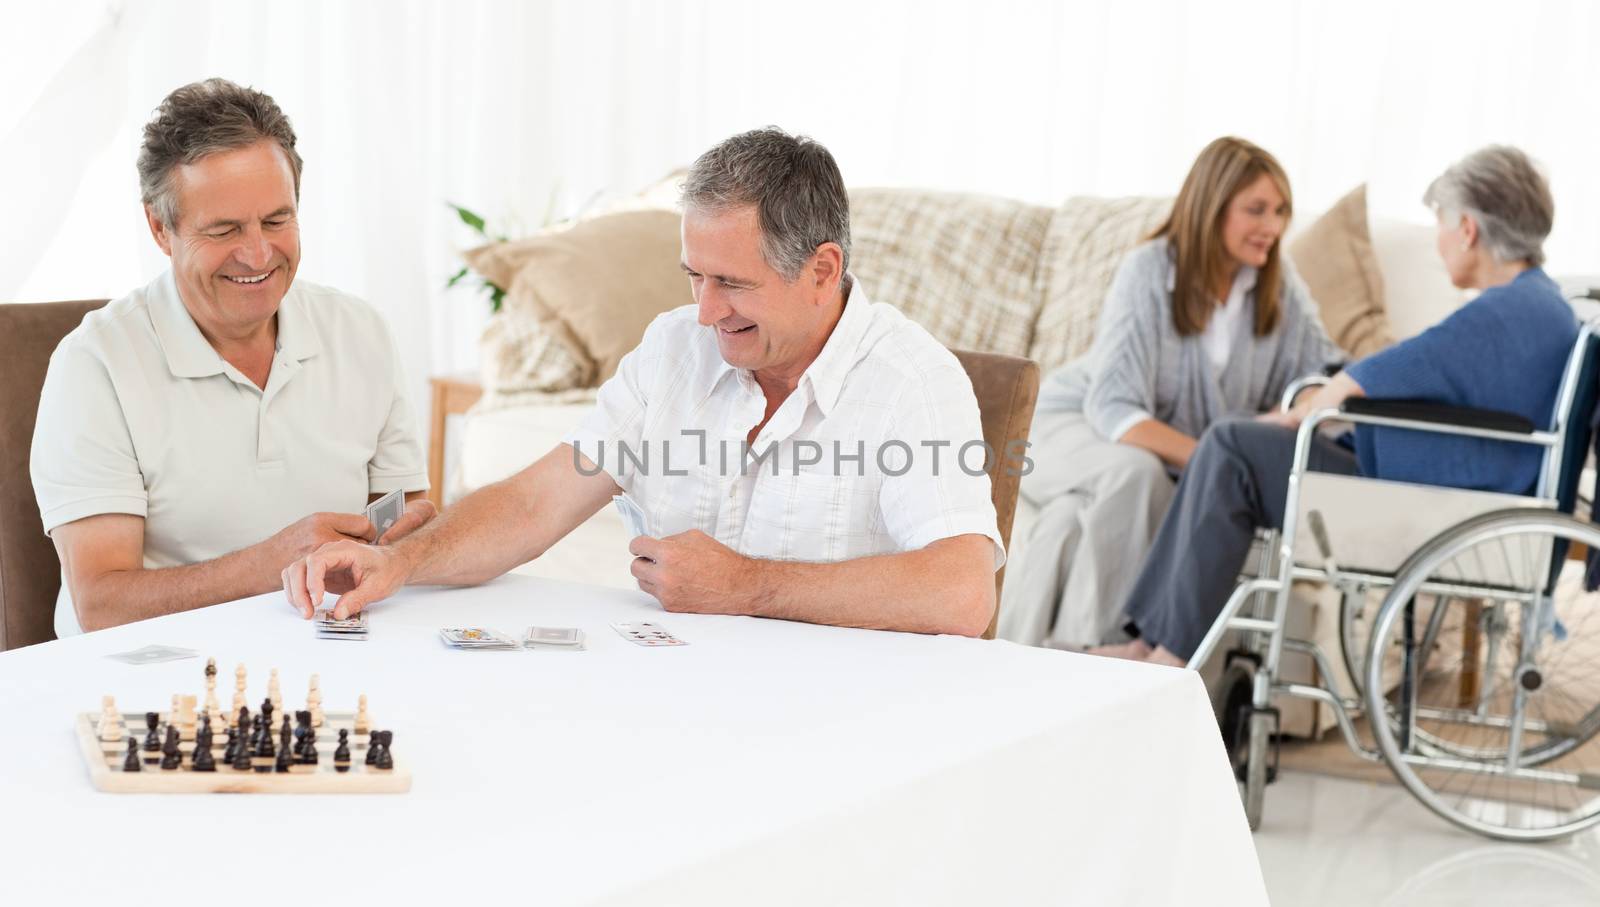 Men playing cards while their wifes are talking by Wavebreakmedia